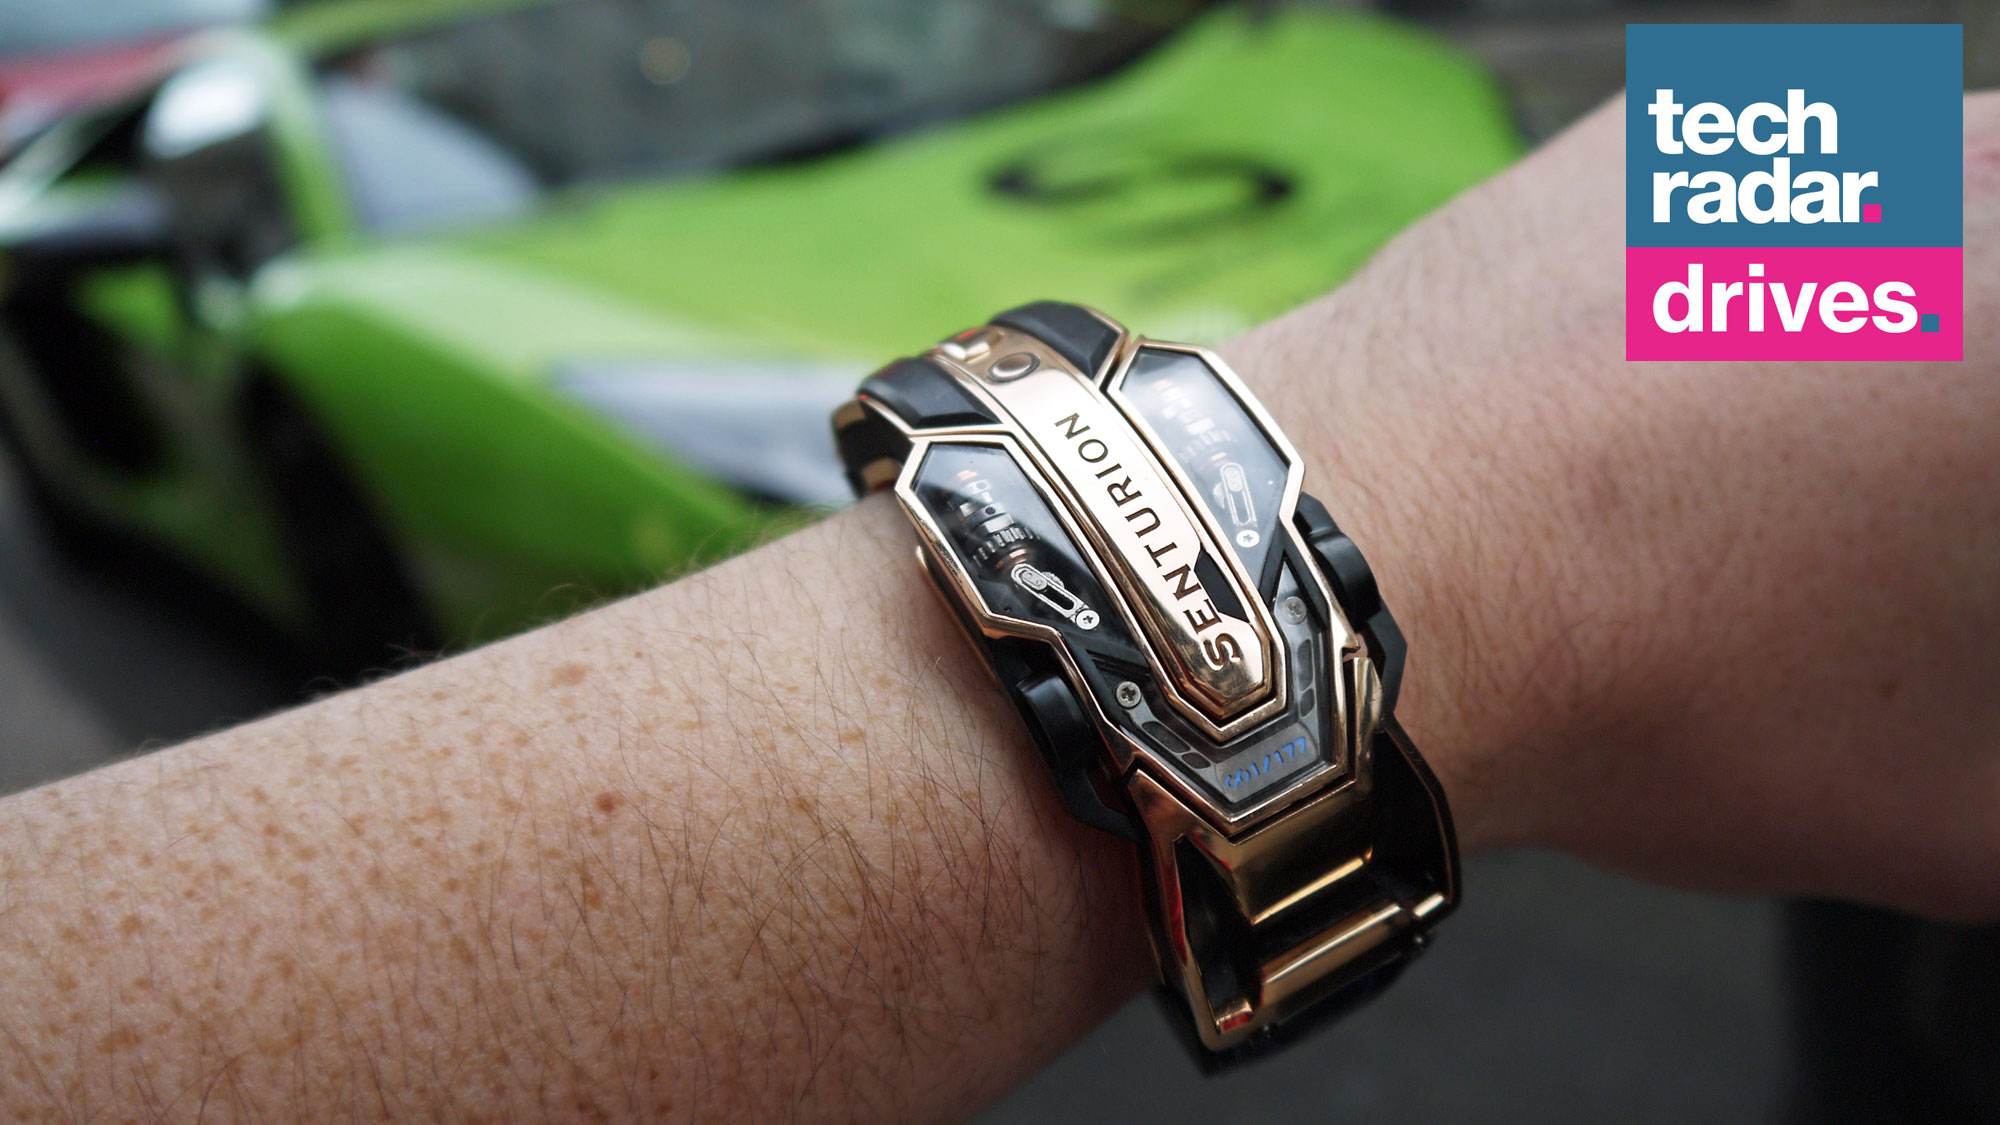 This wearable supercar key probably costs more than your actual car